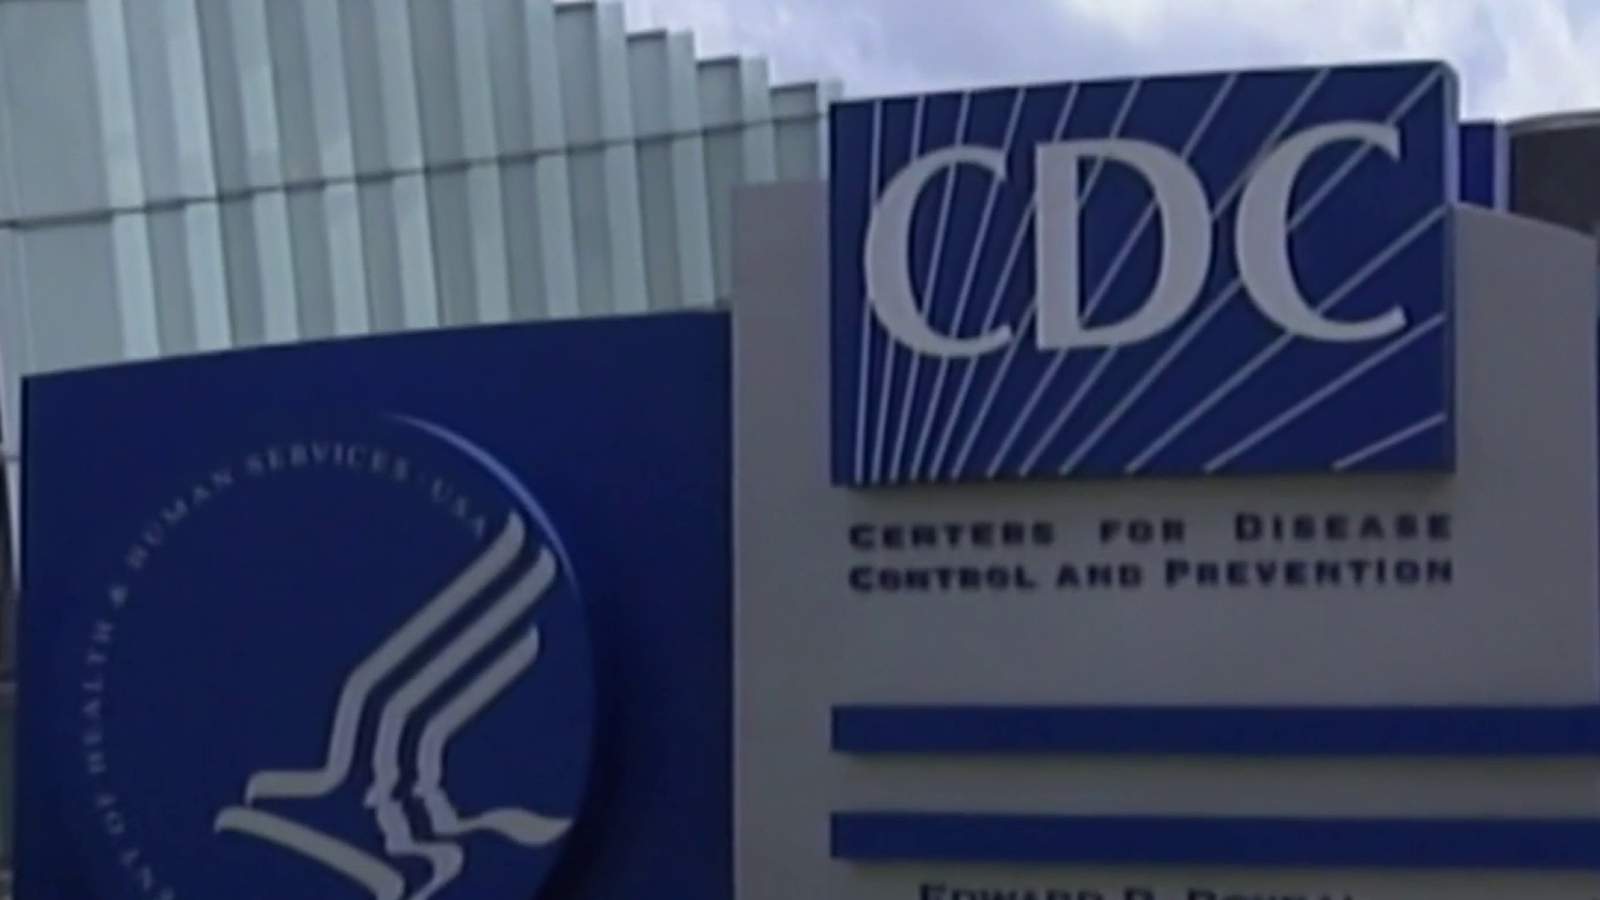 CDC trims quarantine rules down from 14 to 7-10 days